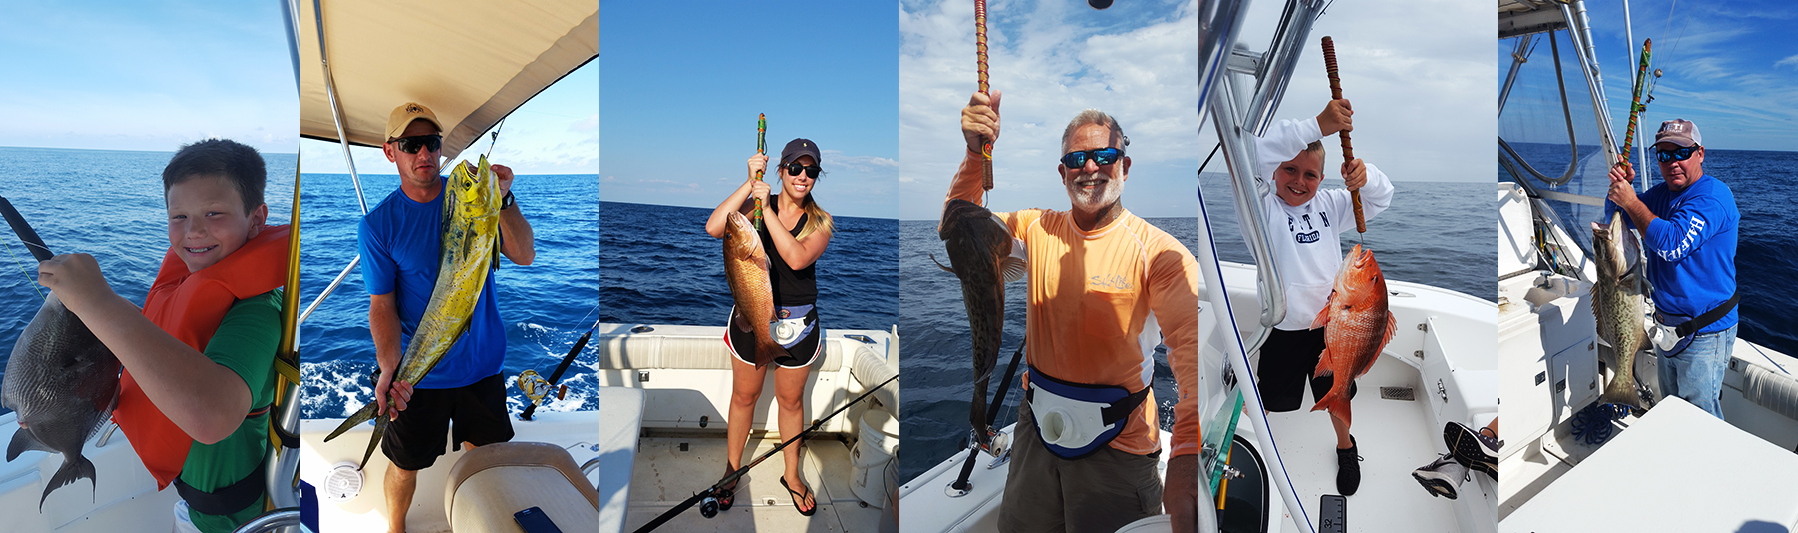 Destin Offshore & Inshore Fishing with Semper Fish Charters